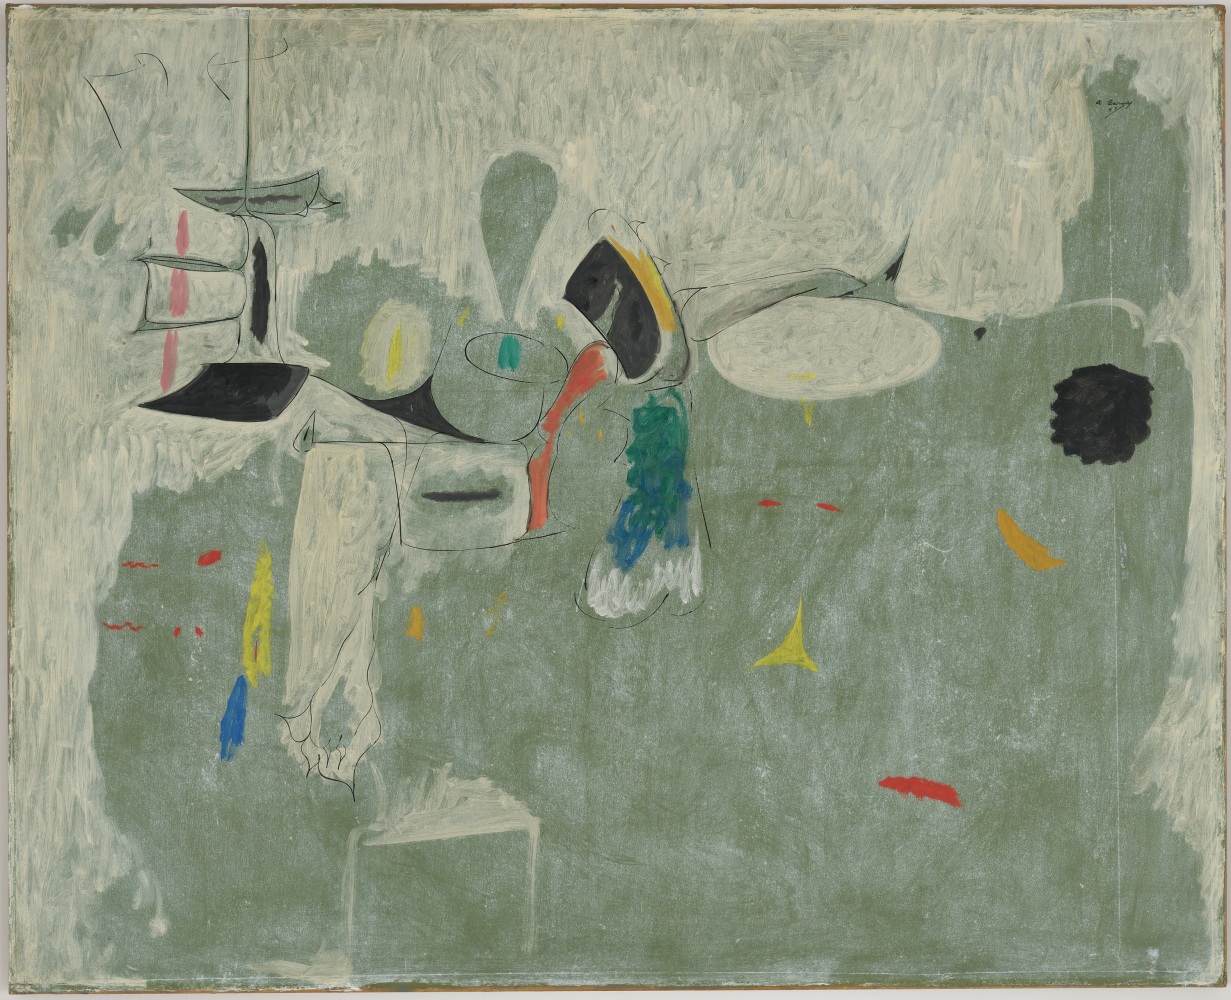 The Limit,&amp;nbsp;1947, oil on paper mounted on canvas,&amp;nbsp;50 3/4 x 62 in. (128.9 x 157.5 cm). Private collection.&amp;nbsp;[AGCR: P318]